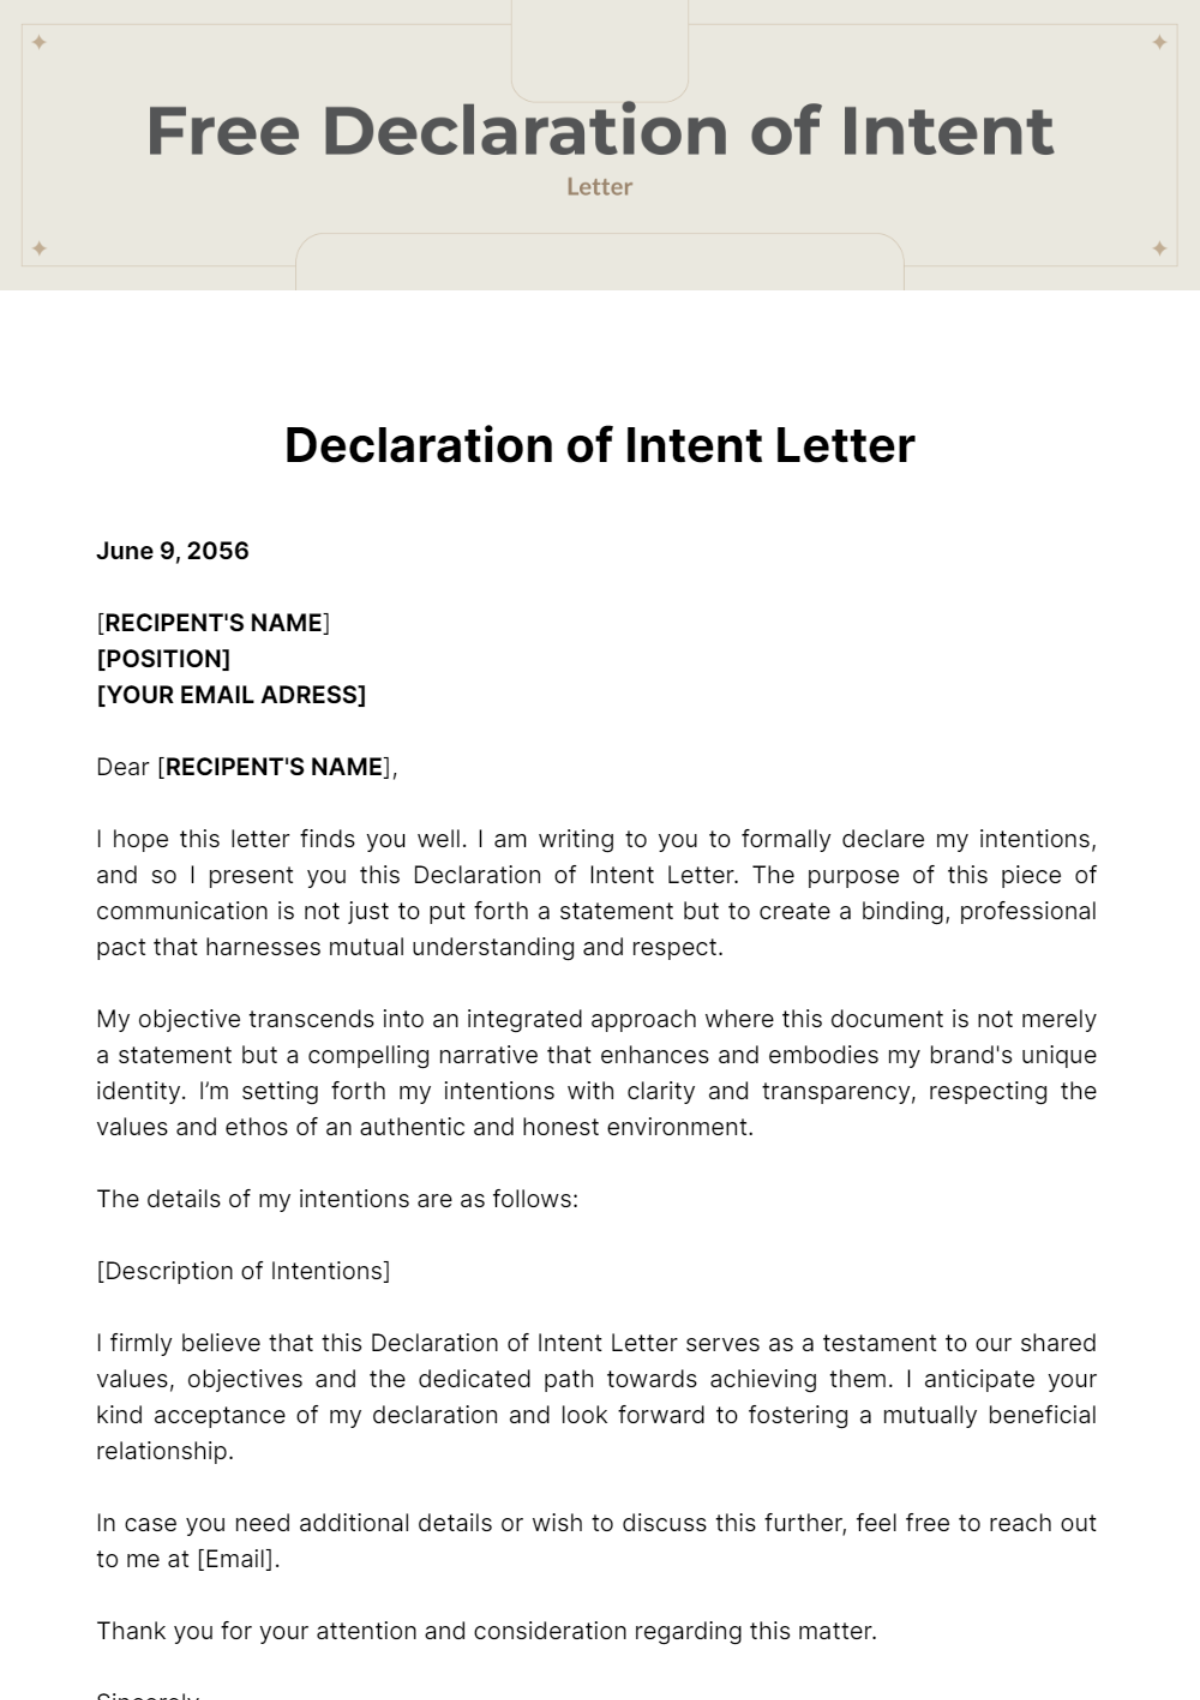 Free Declaration of Intent Letter Template